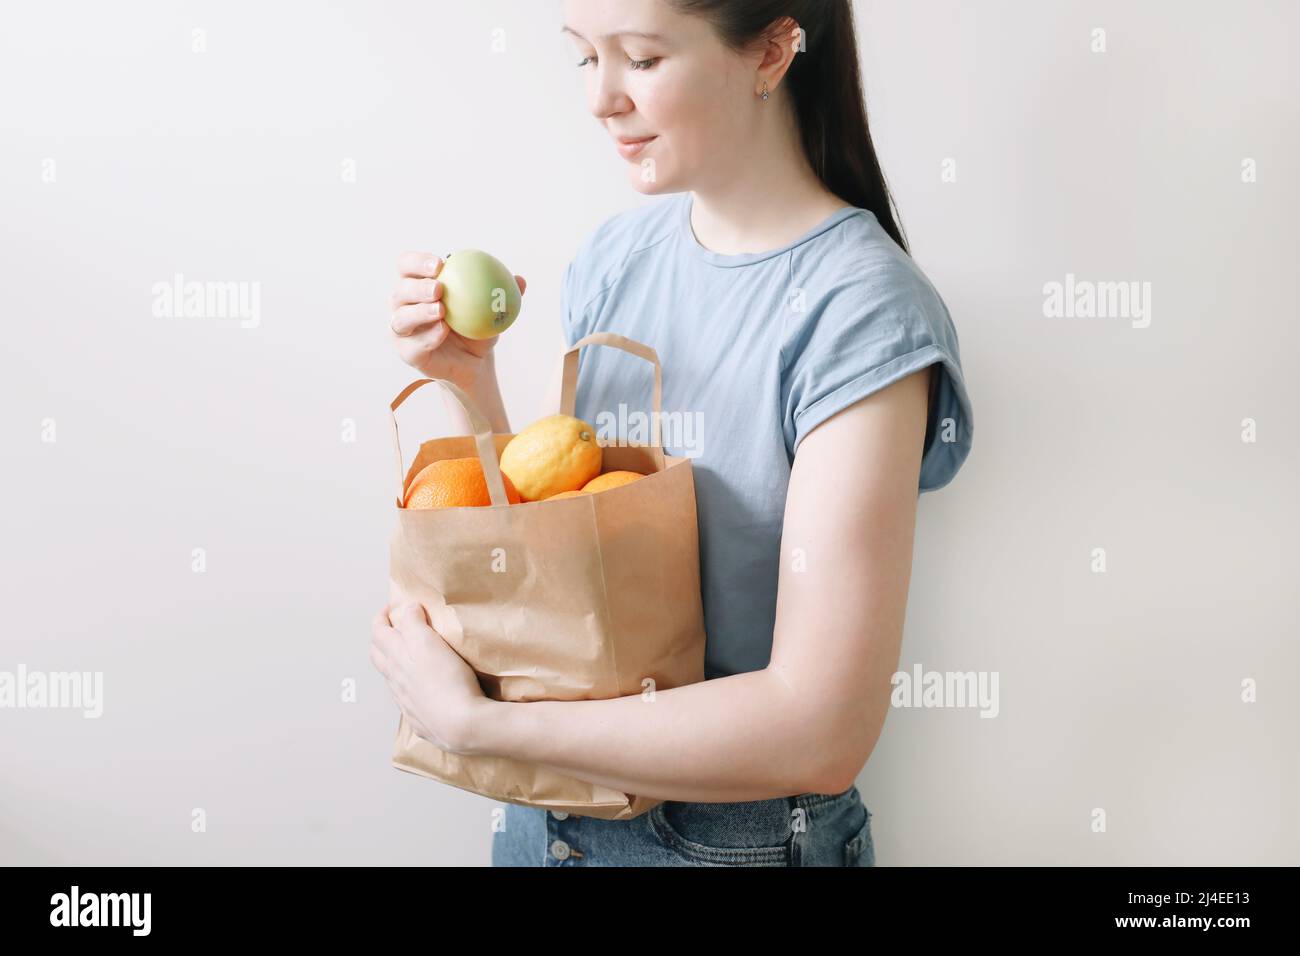 shopping, healthy eating and eco friendly concept - close up of woman holding eco bag with fruits on white background Stock Photo